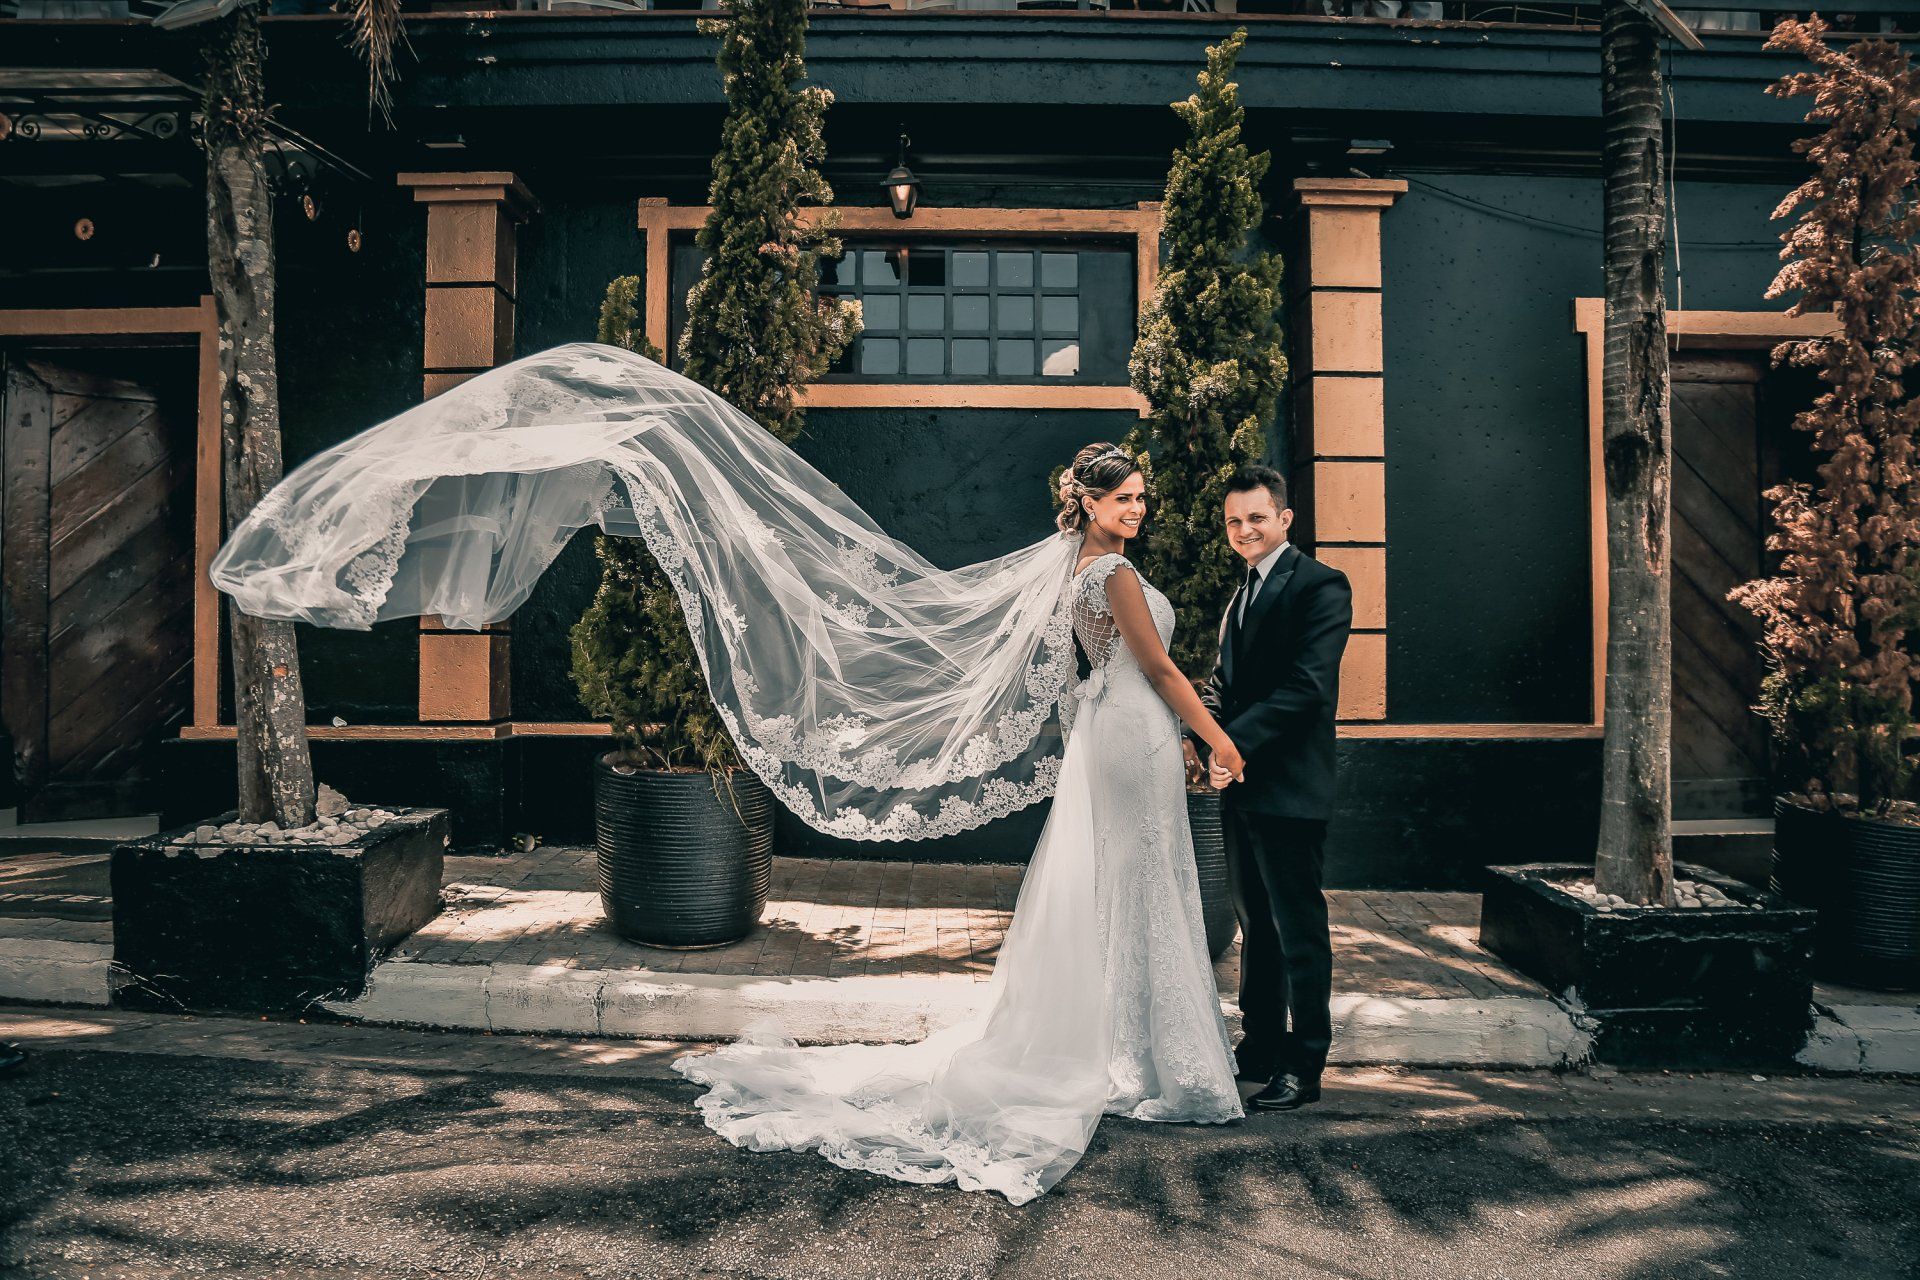 tips and ticks: the happy couple taking amazing photos